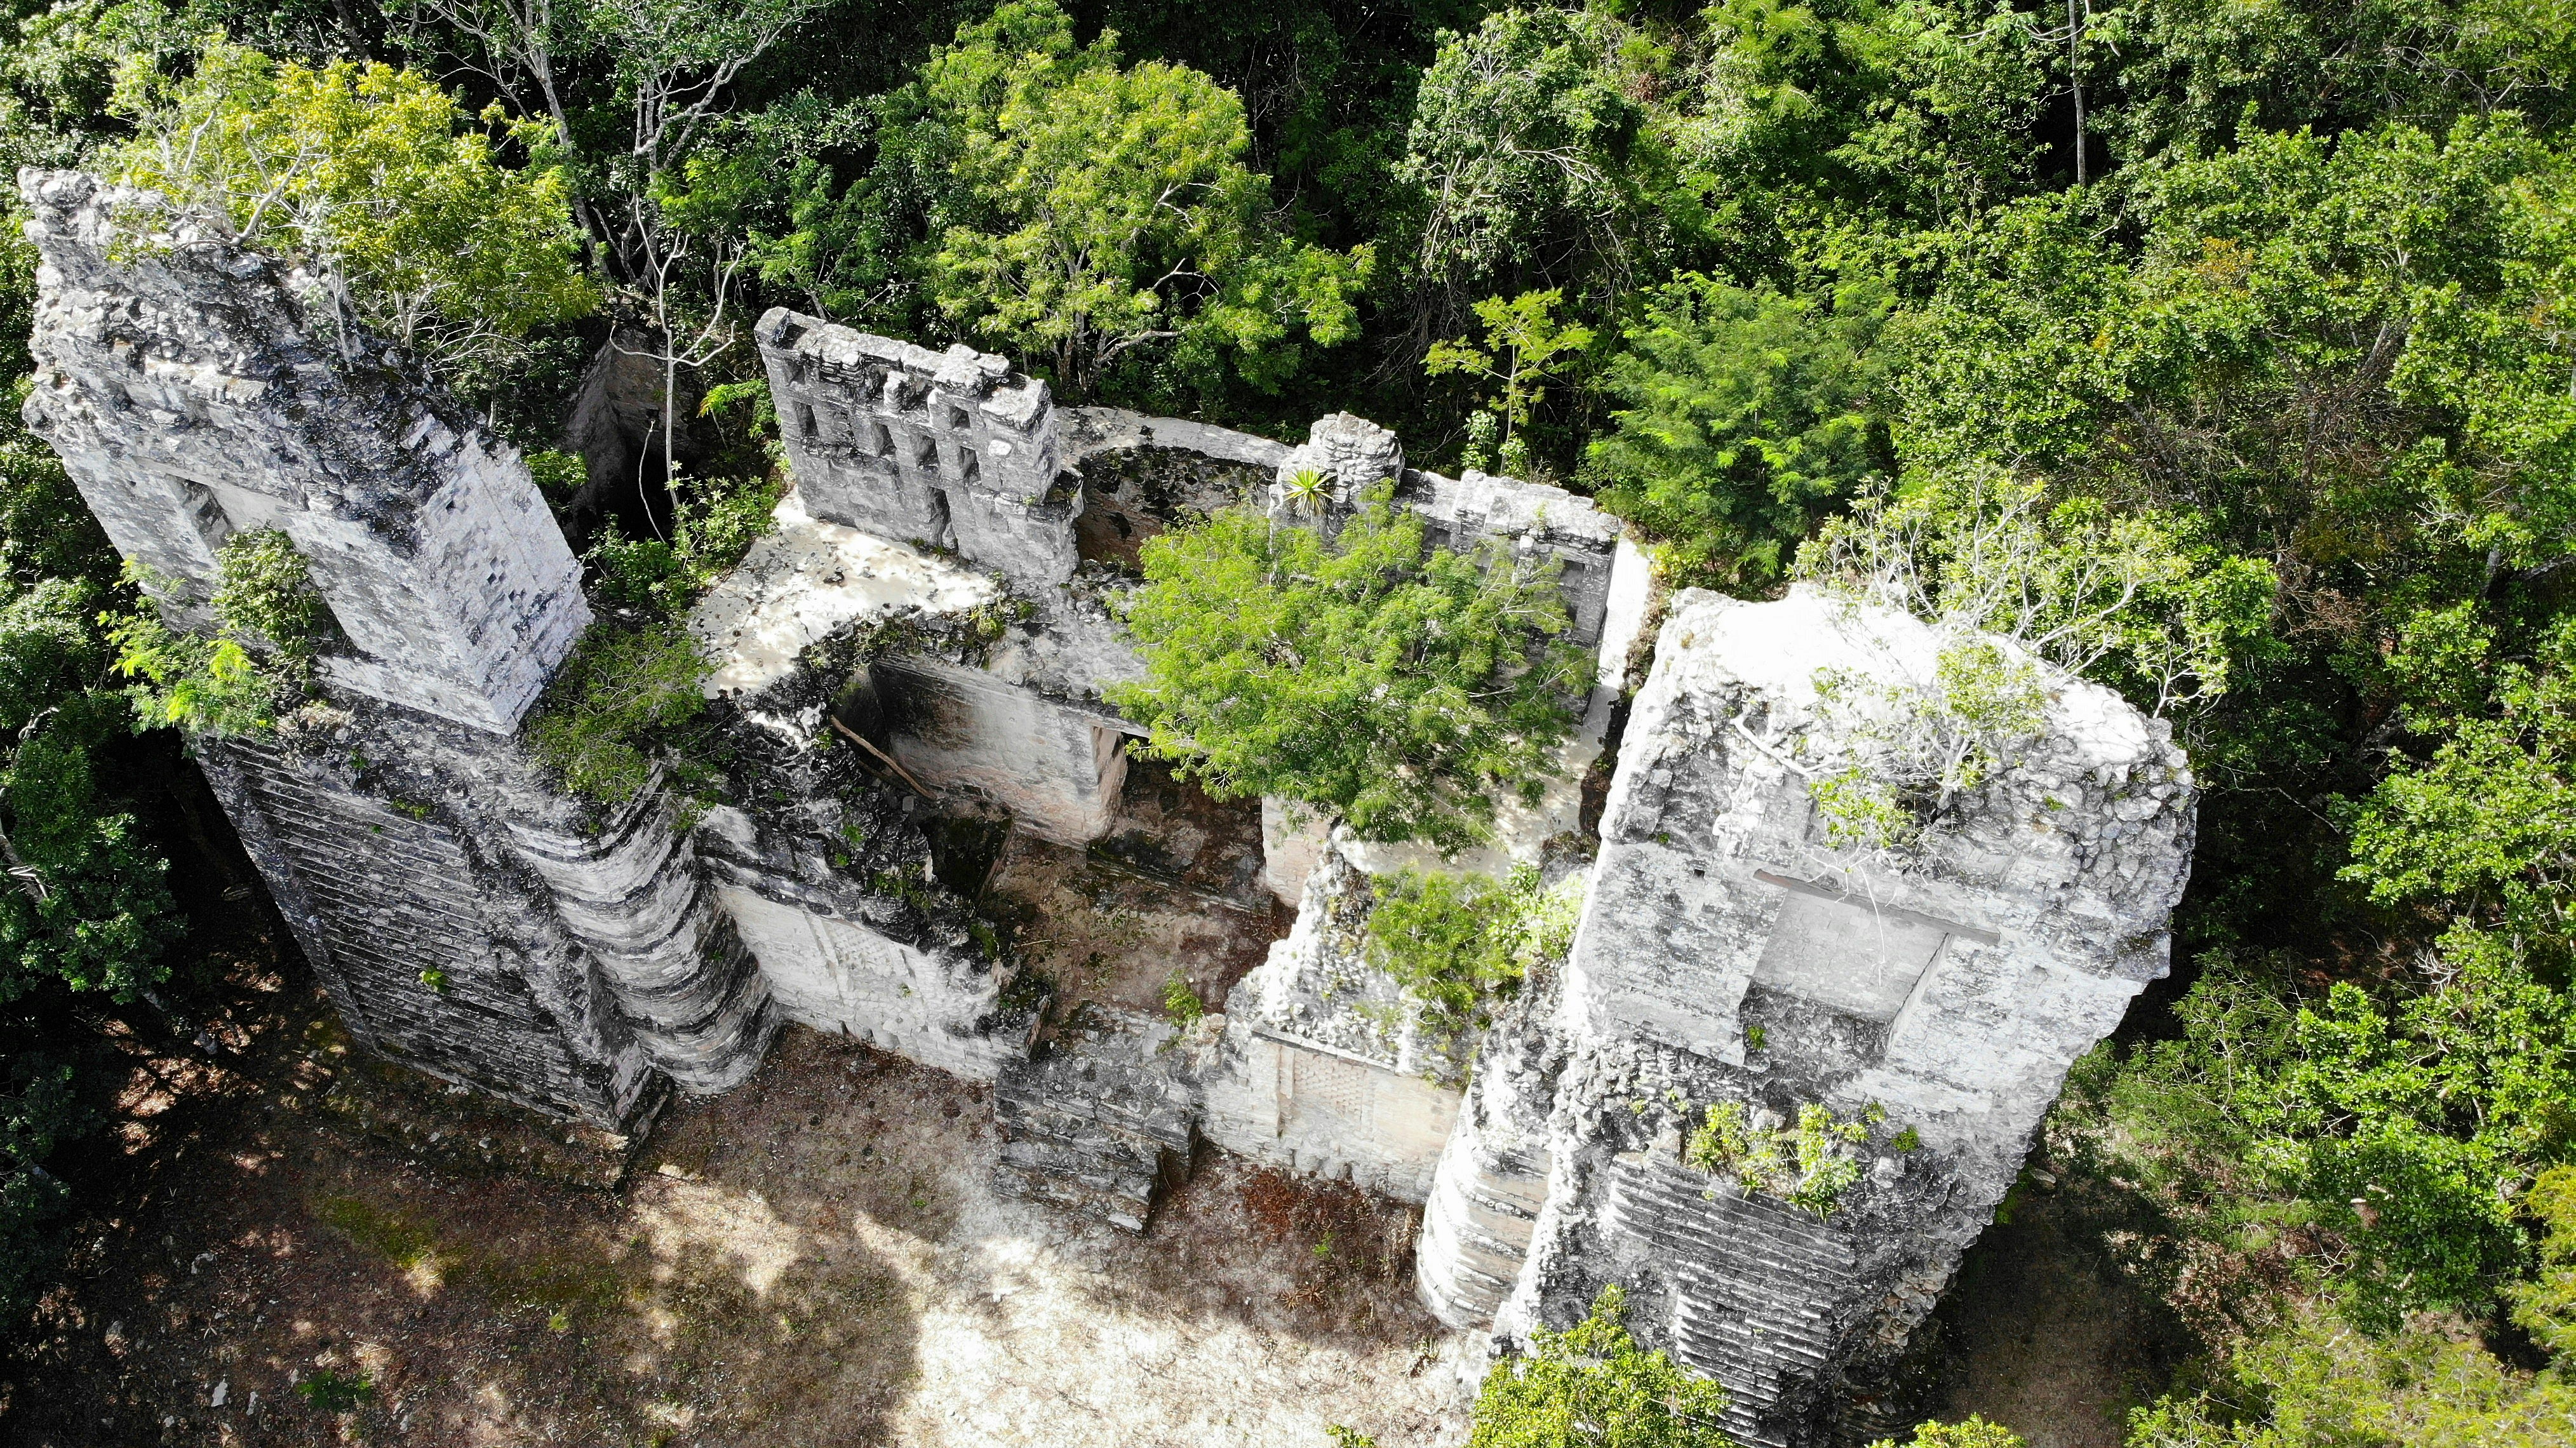 Aerial shot of Mayan ruins with trees surrounding and growing from the rocks